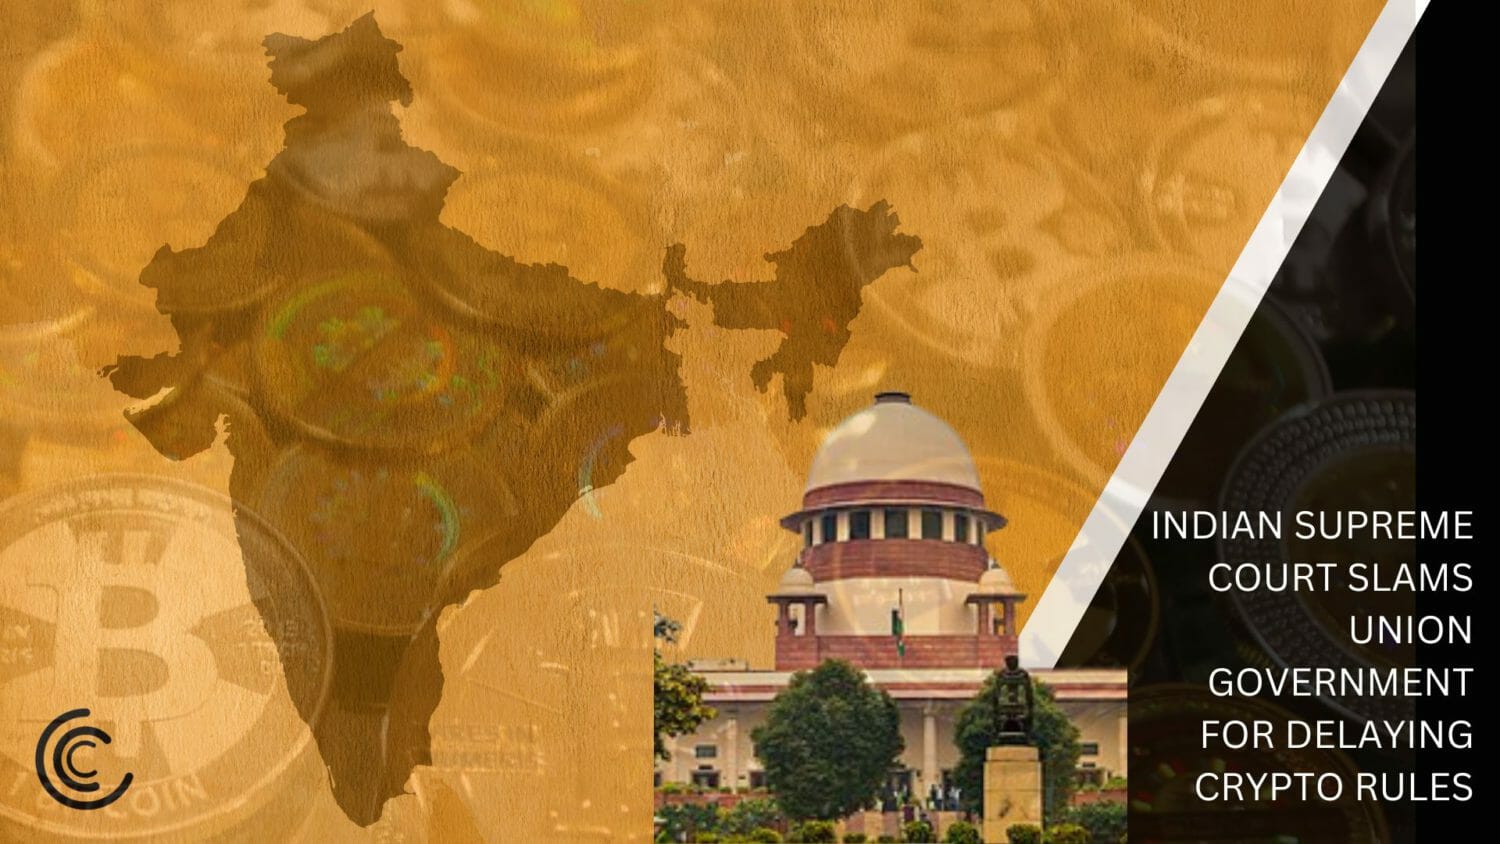 Indian Supreme Court Slams Union Government For Delaying Crypto Rules